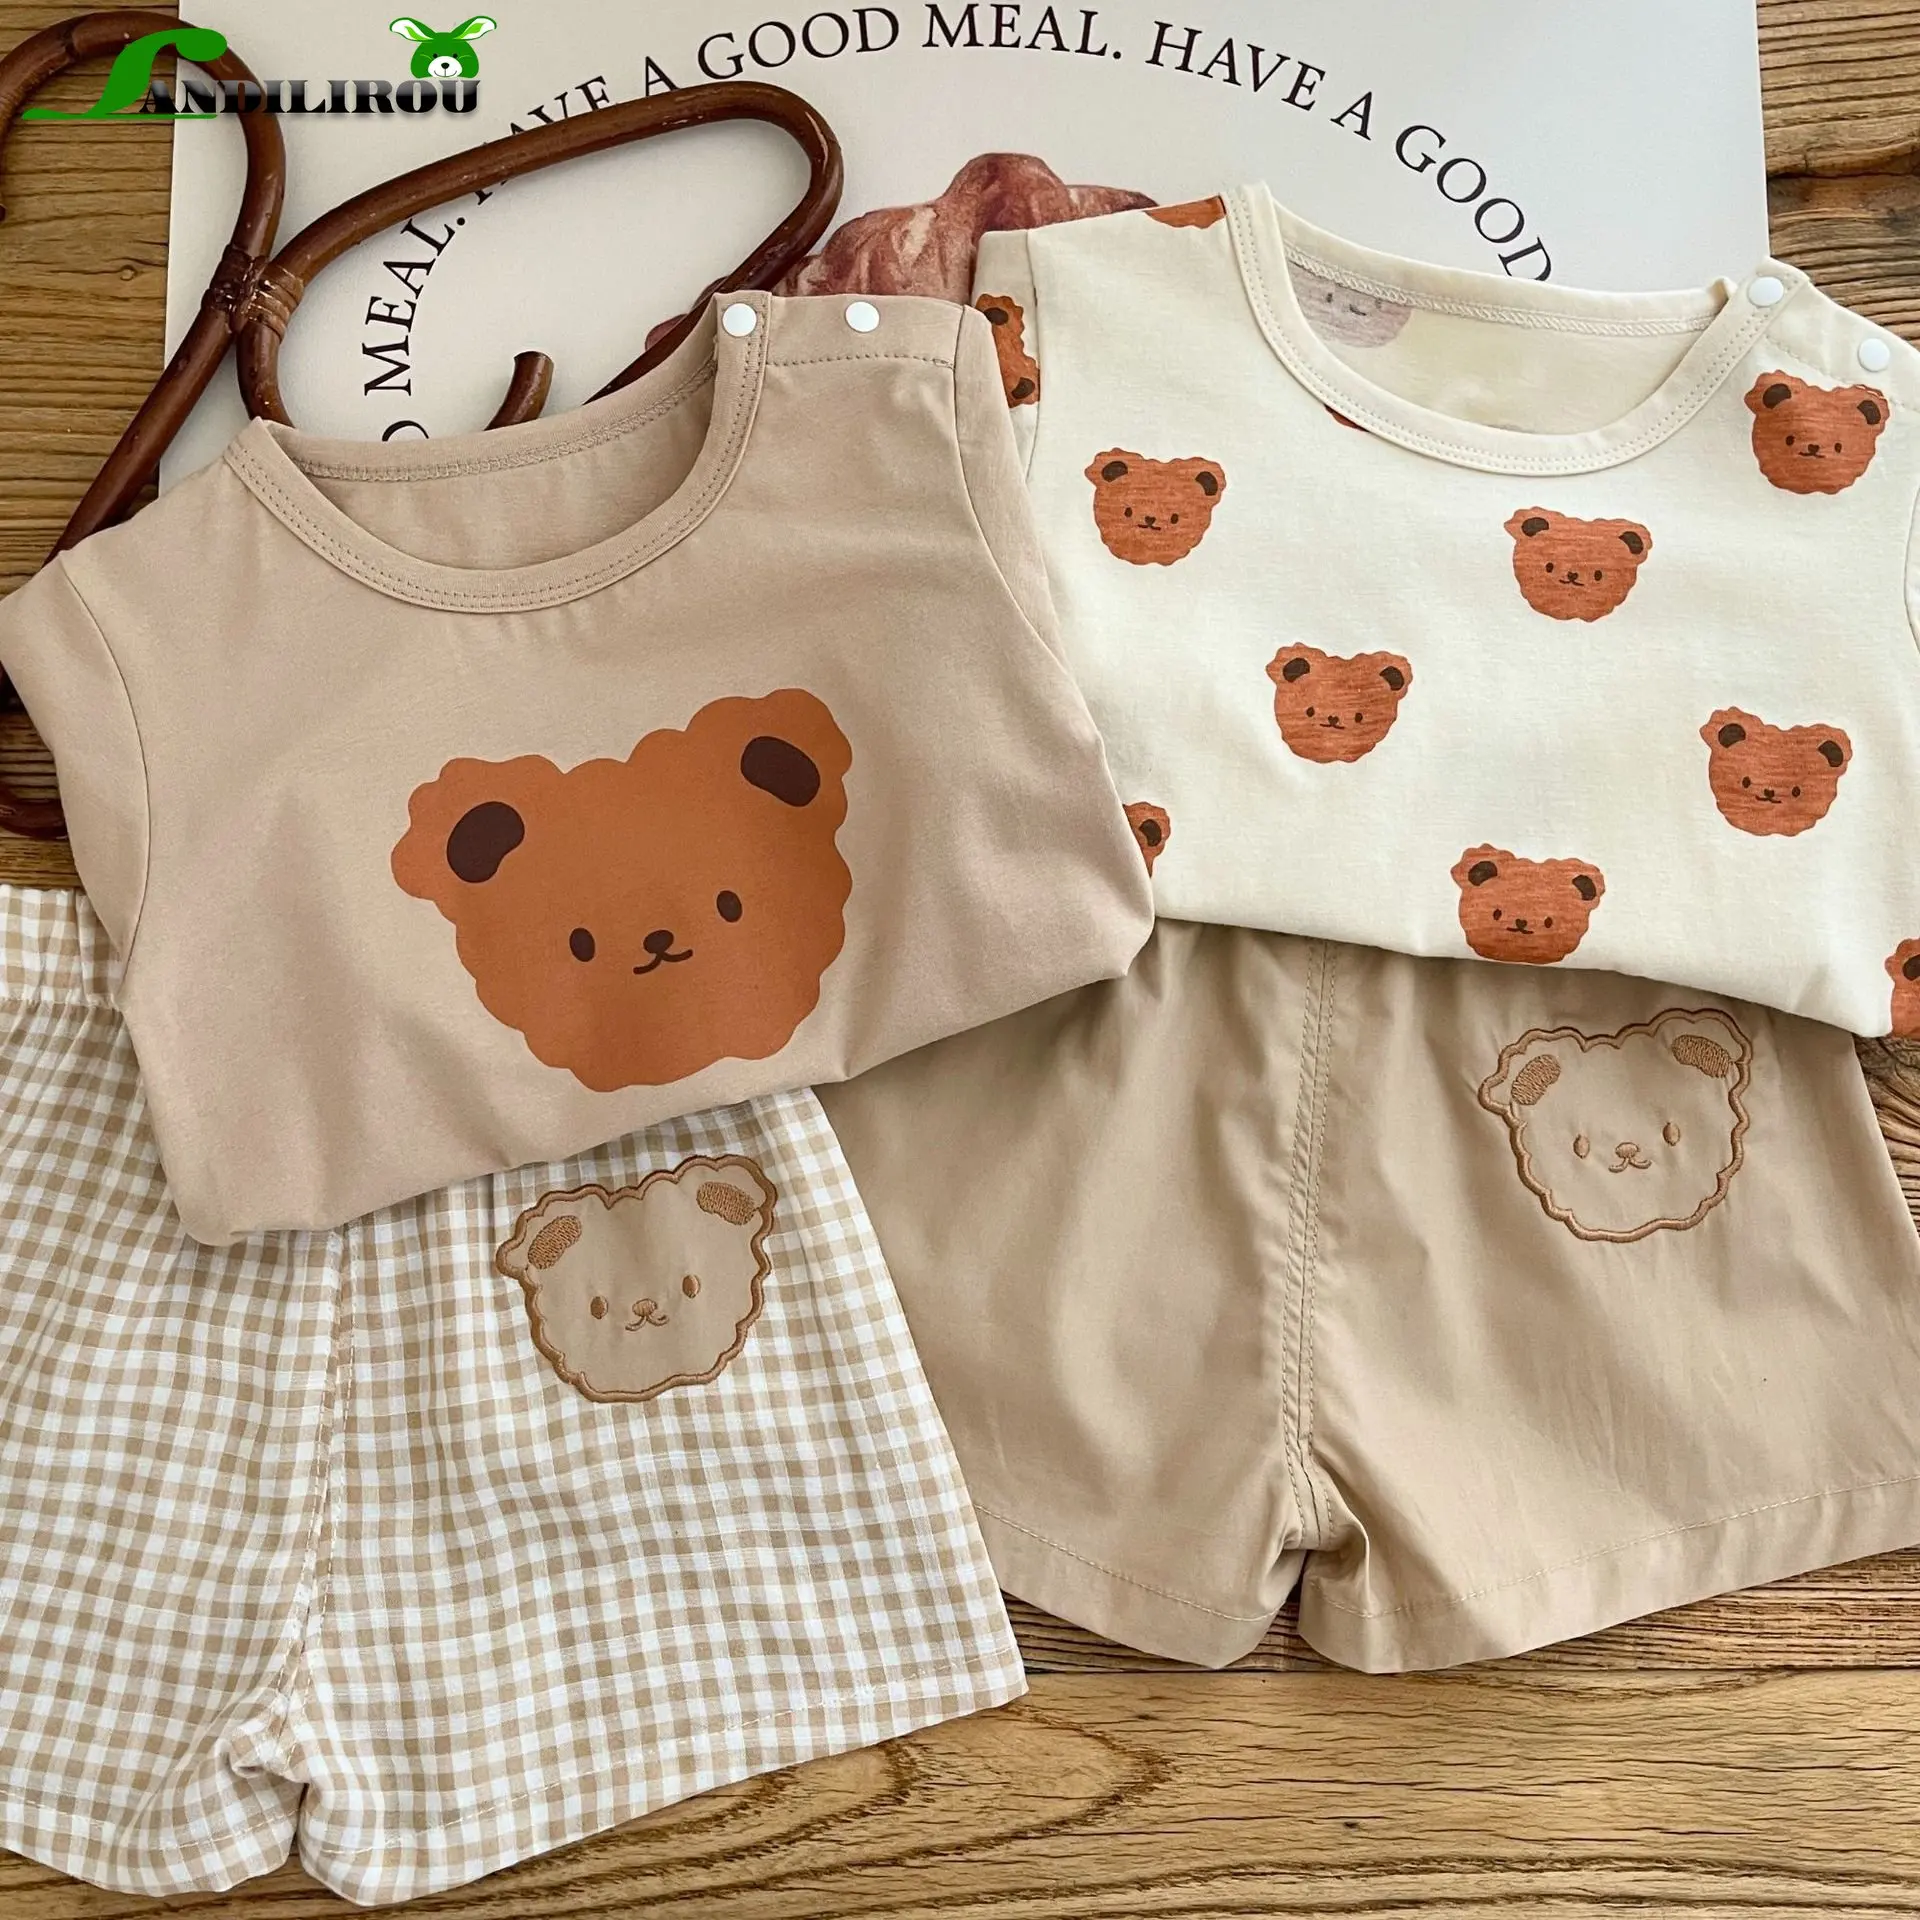 

Cute Summer Outfits Infant Toddlers: Short Sleeve Bear Print Tops Tees Embroidered Plaid Shorts for Girls Boys Children 3M-6Y